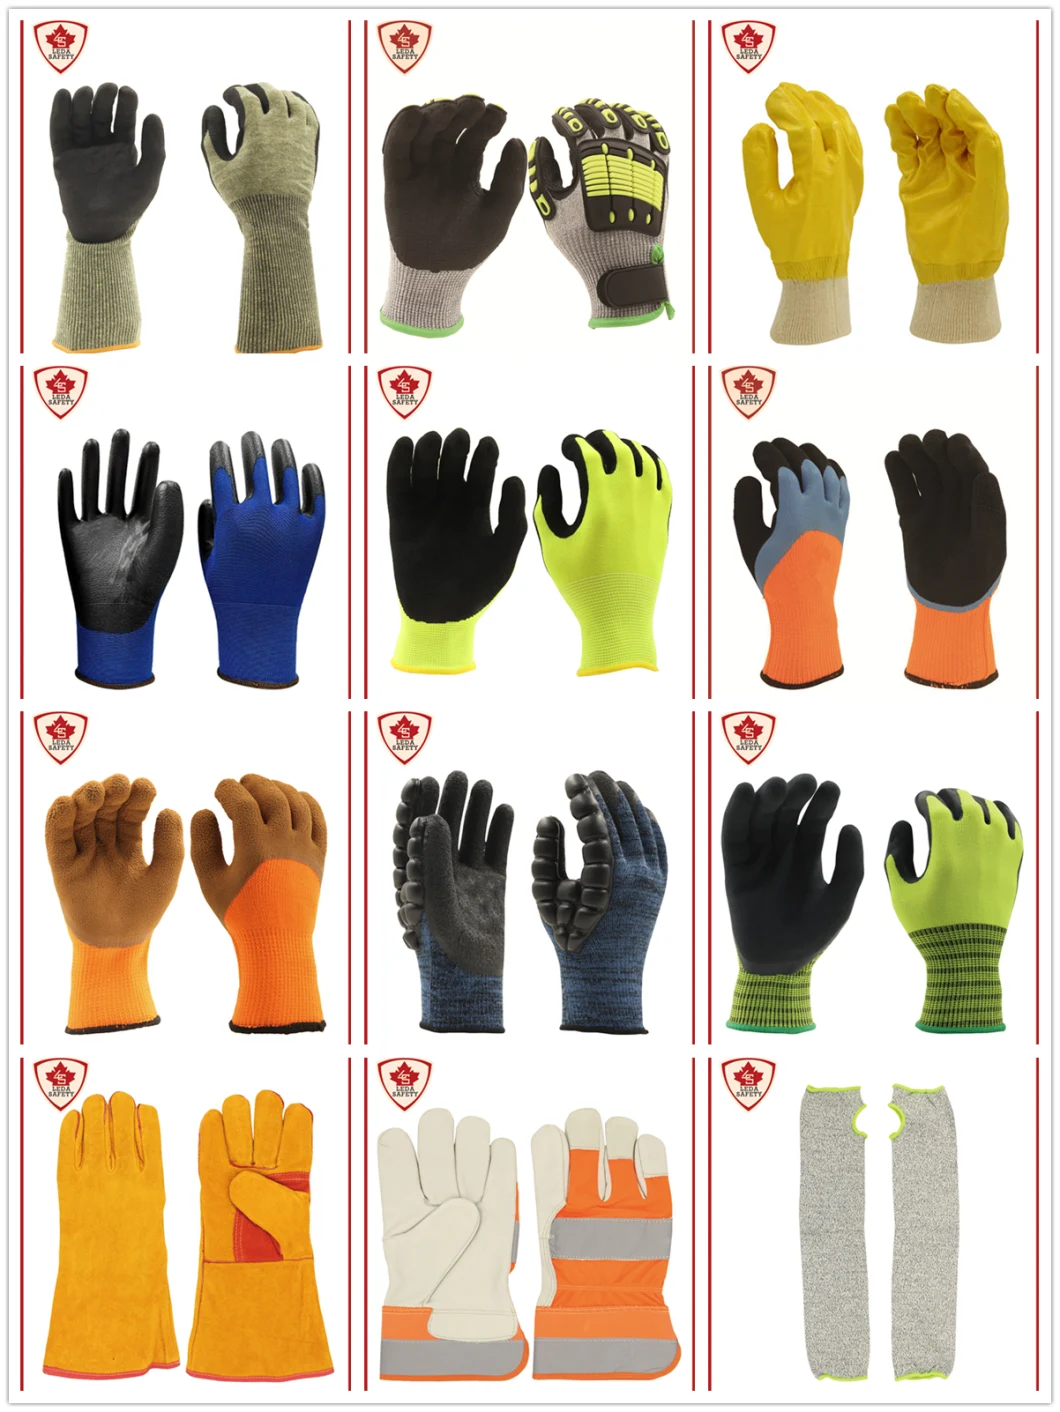 Mechanical Use Impact Resistant Cut Resistant Heavy Duty Hand Protecting Work Gloves